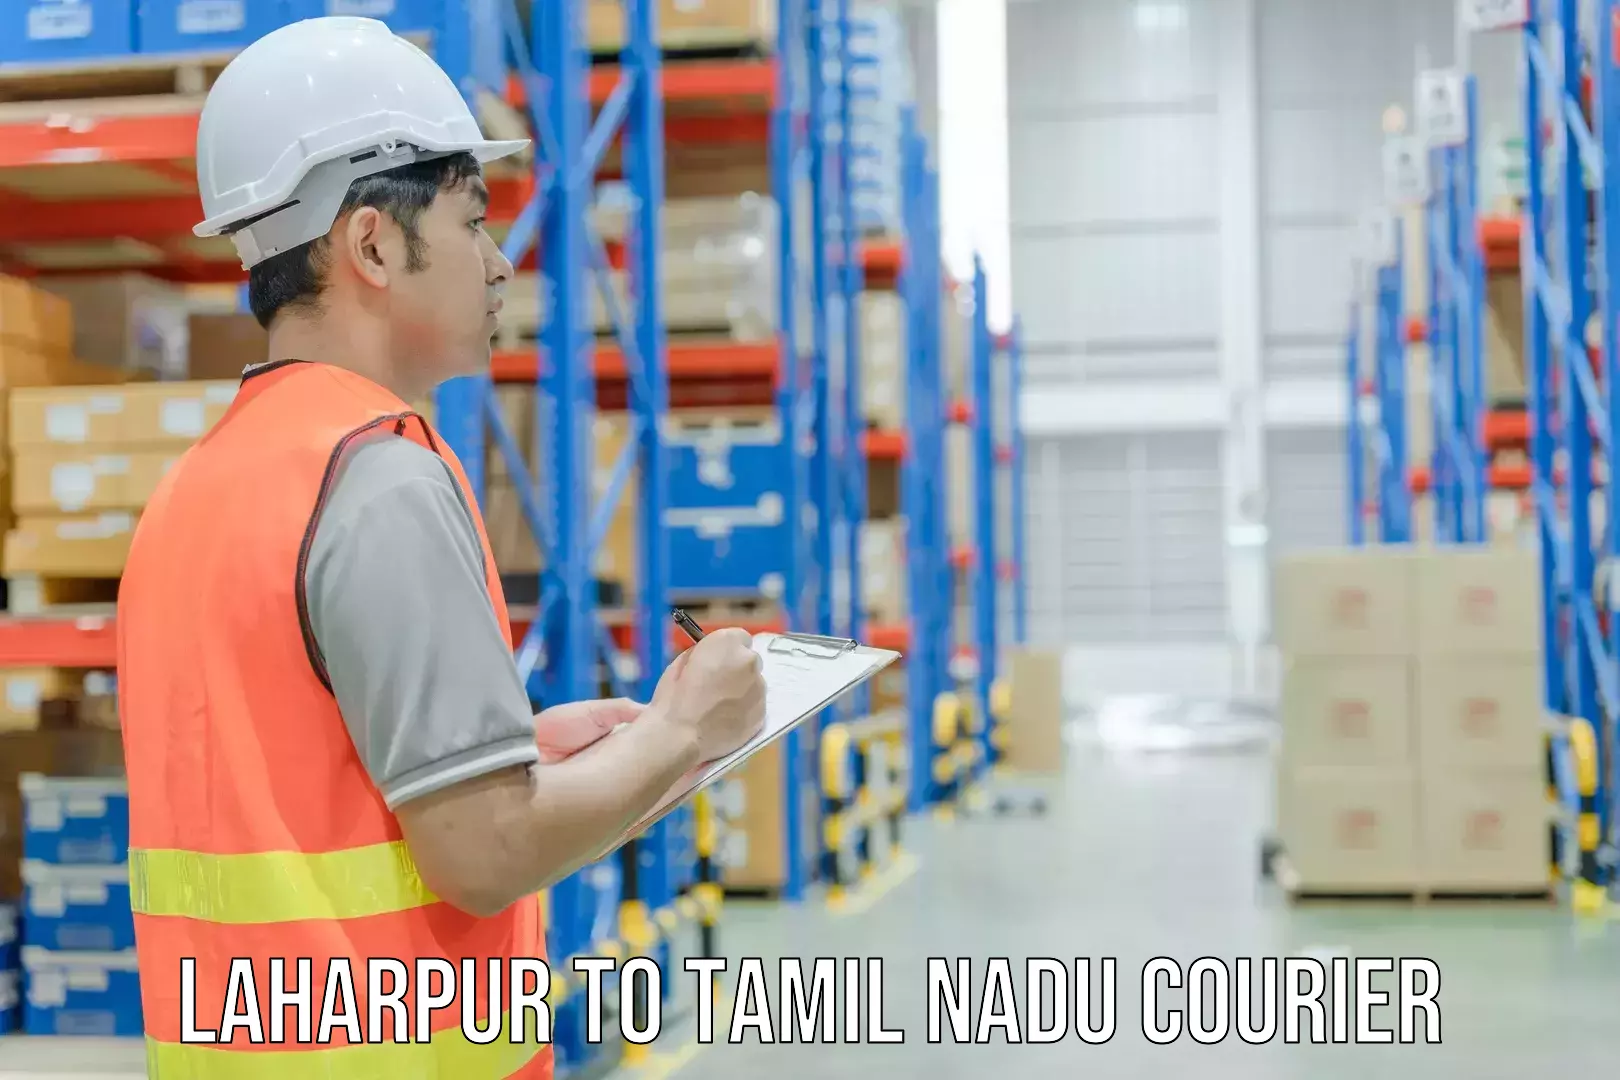 Nationwide shipping services Laharpur to Tamil Nadu